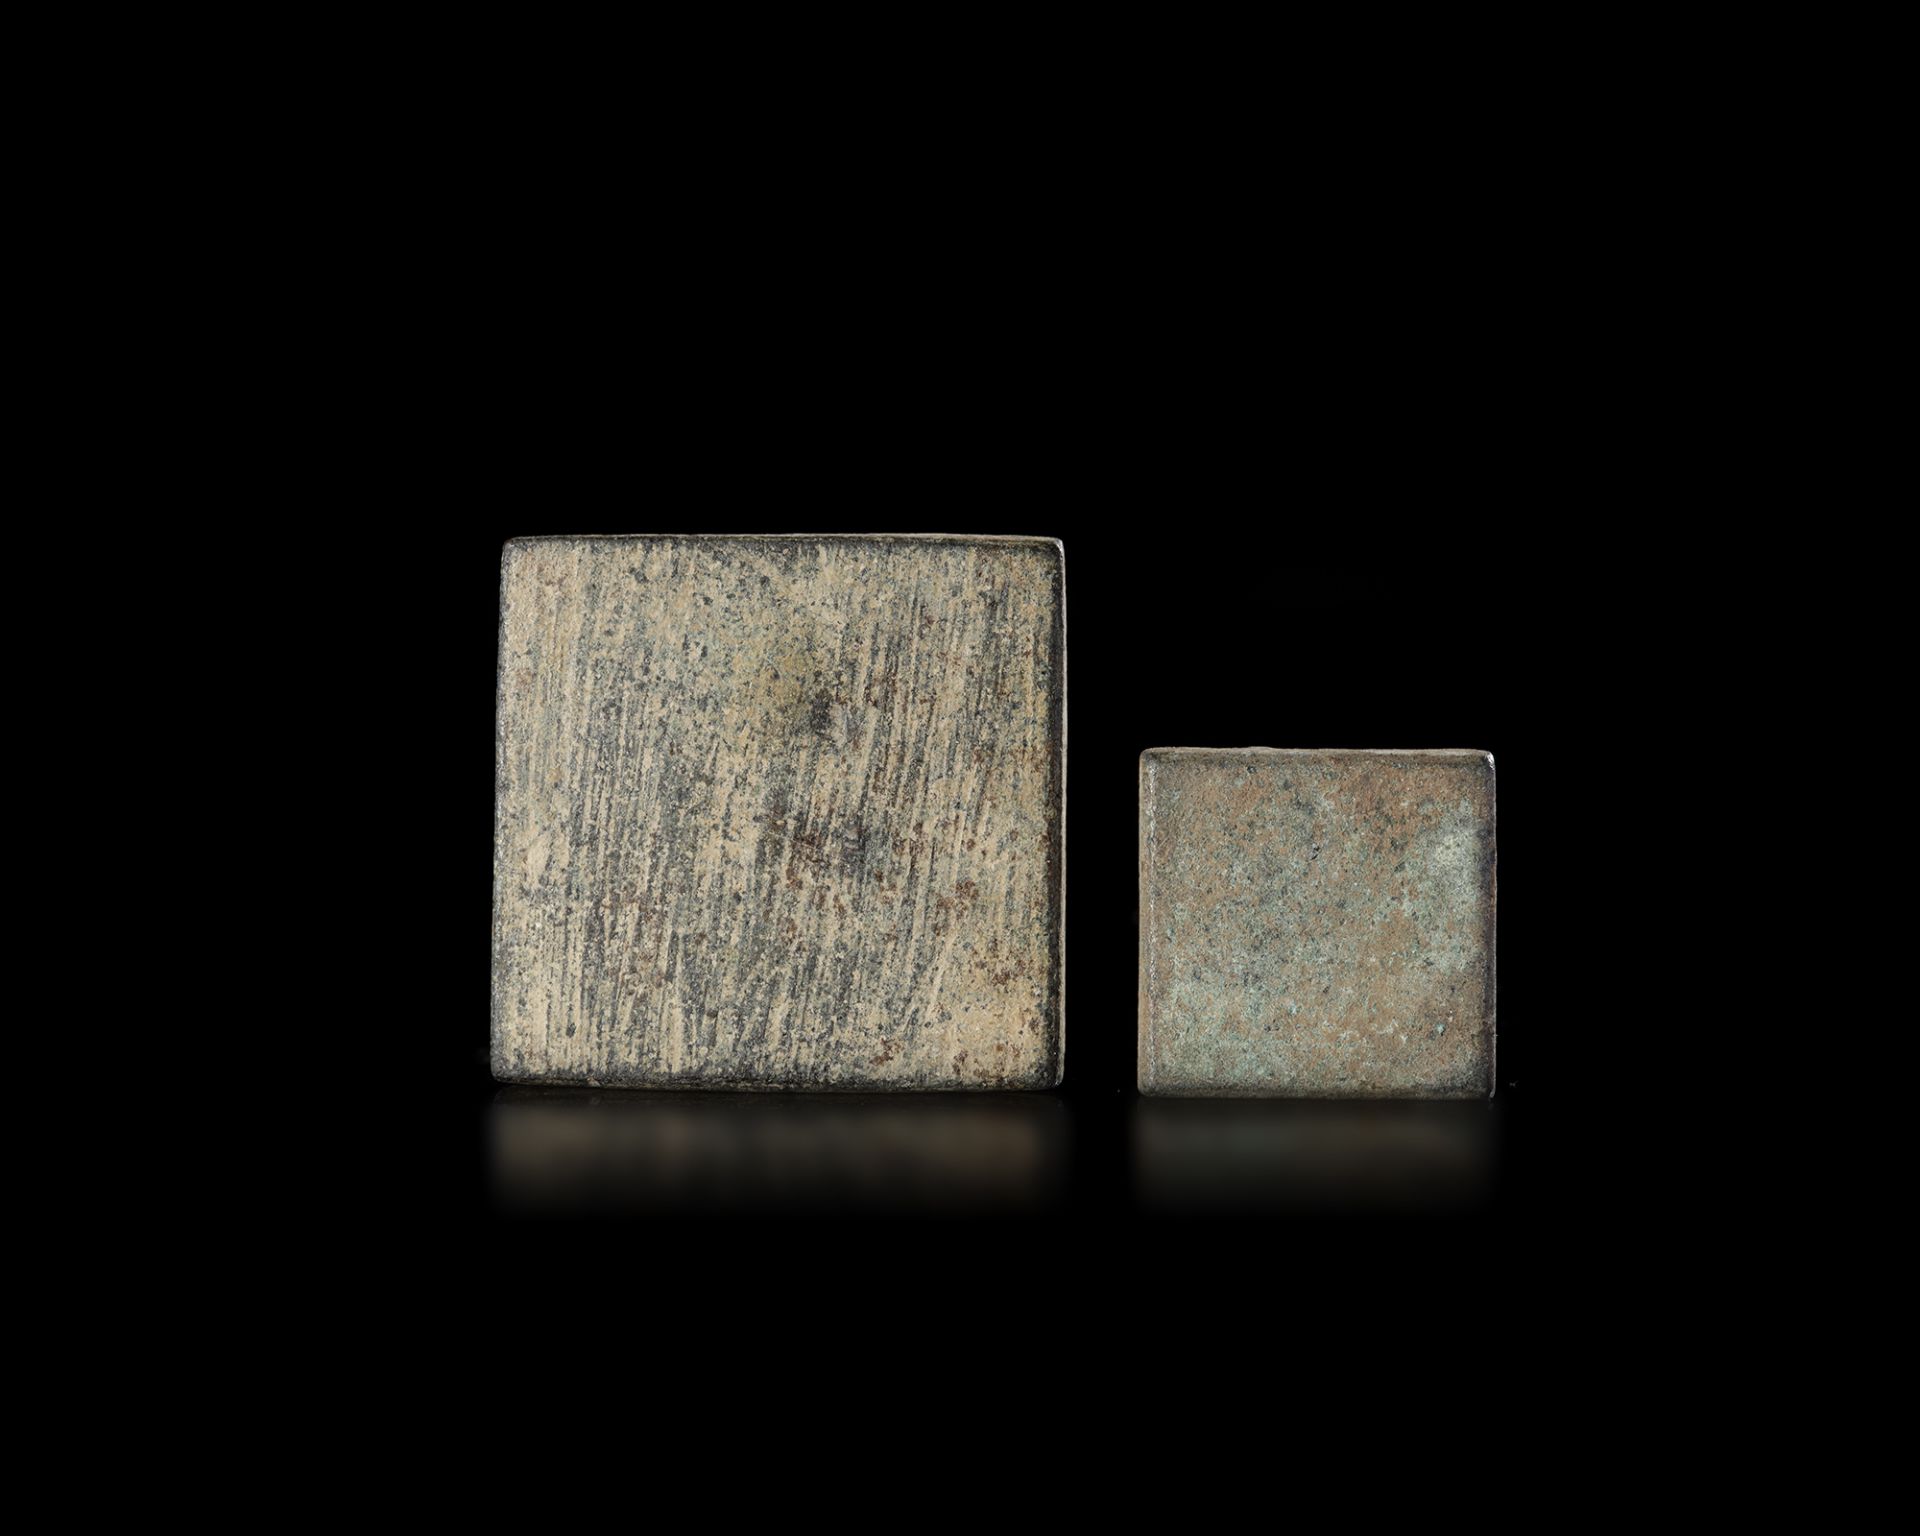 TWO BYZANTINE BRONZE COMMERCIAL WEIGHTS, 5TH-7TH CENTURY AD - Image 2 of 3